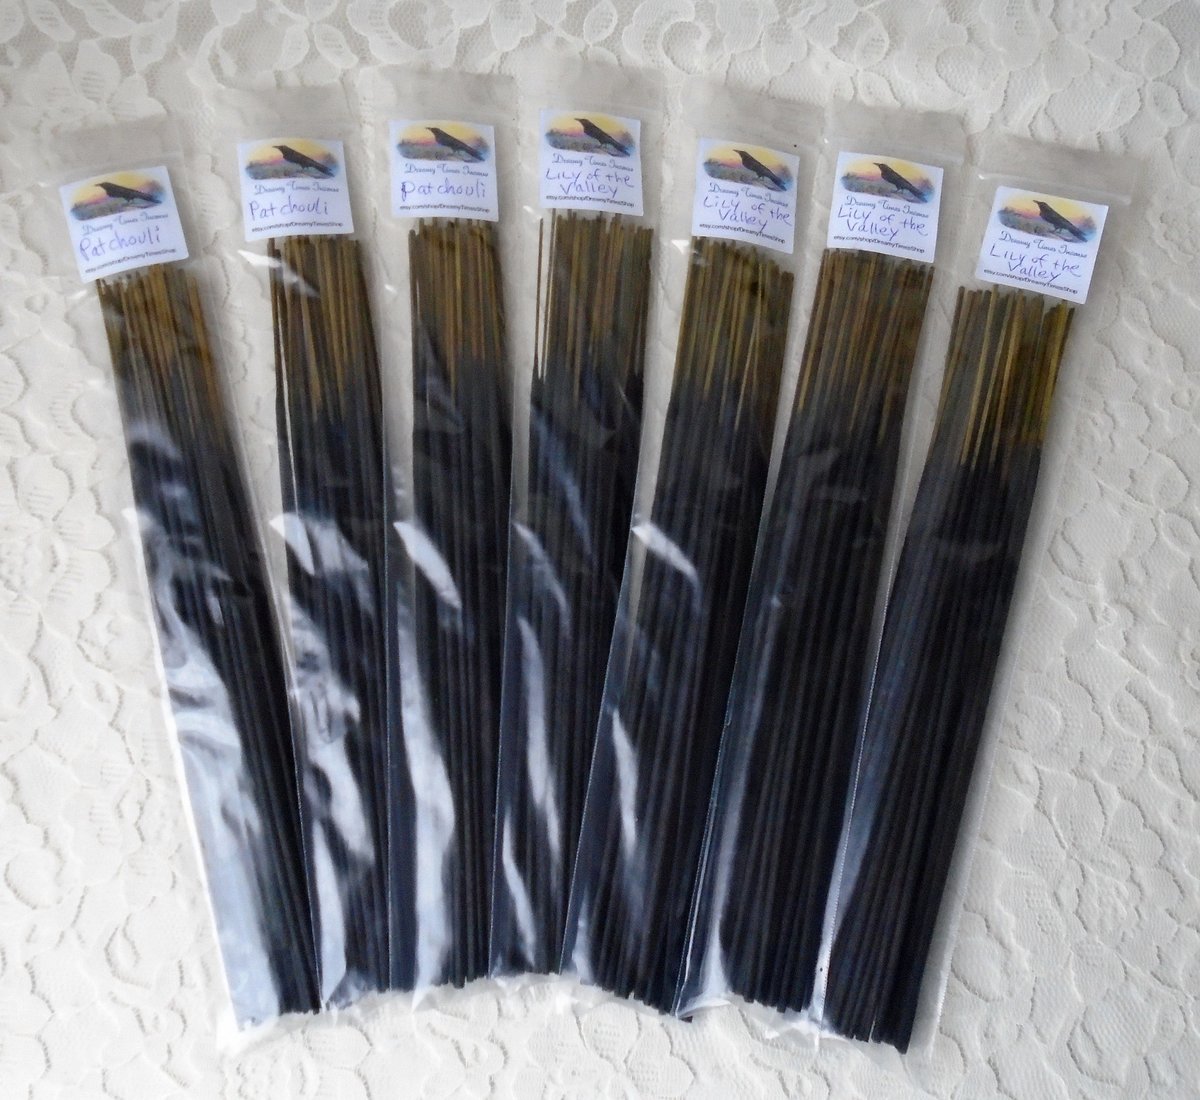 Incense Kingsroad Brandy Fresh Hand Dipped Charcoal 20 Sticks Home Fragrance Handmade Gift Entertaining Holidays Relaxation Game of Thrones